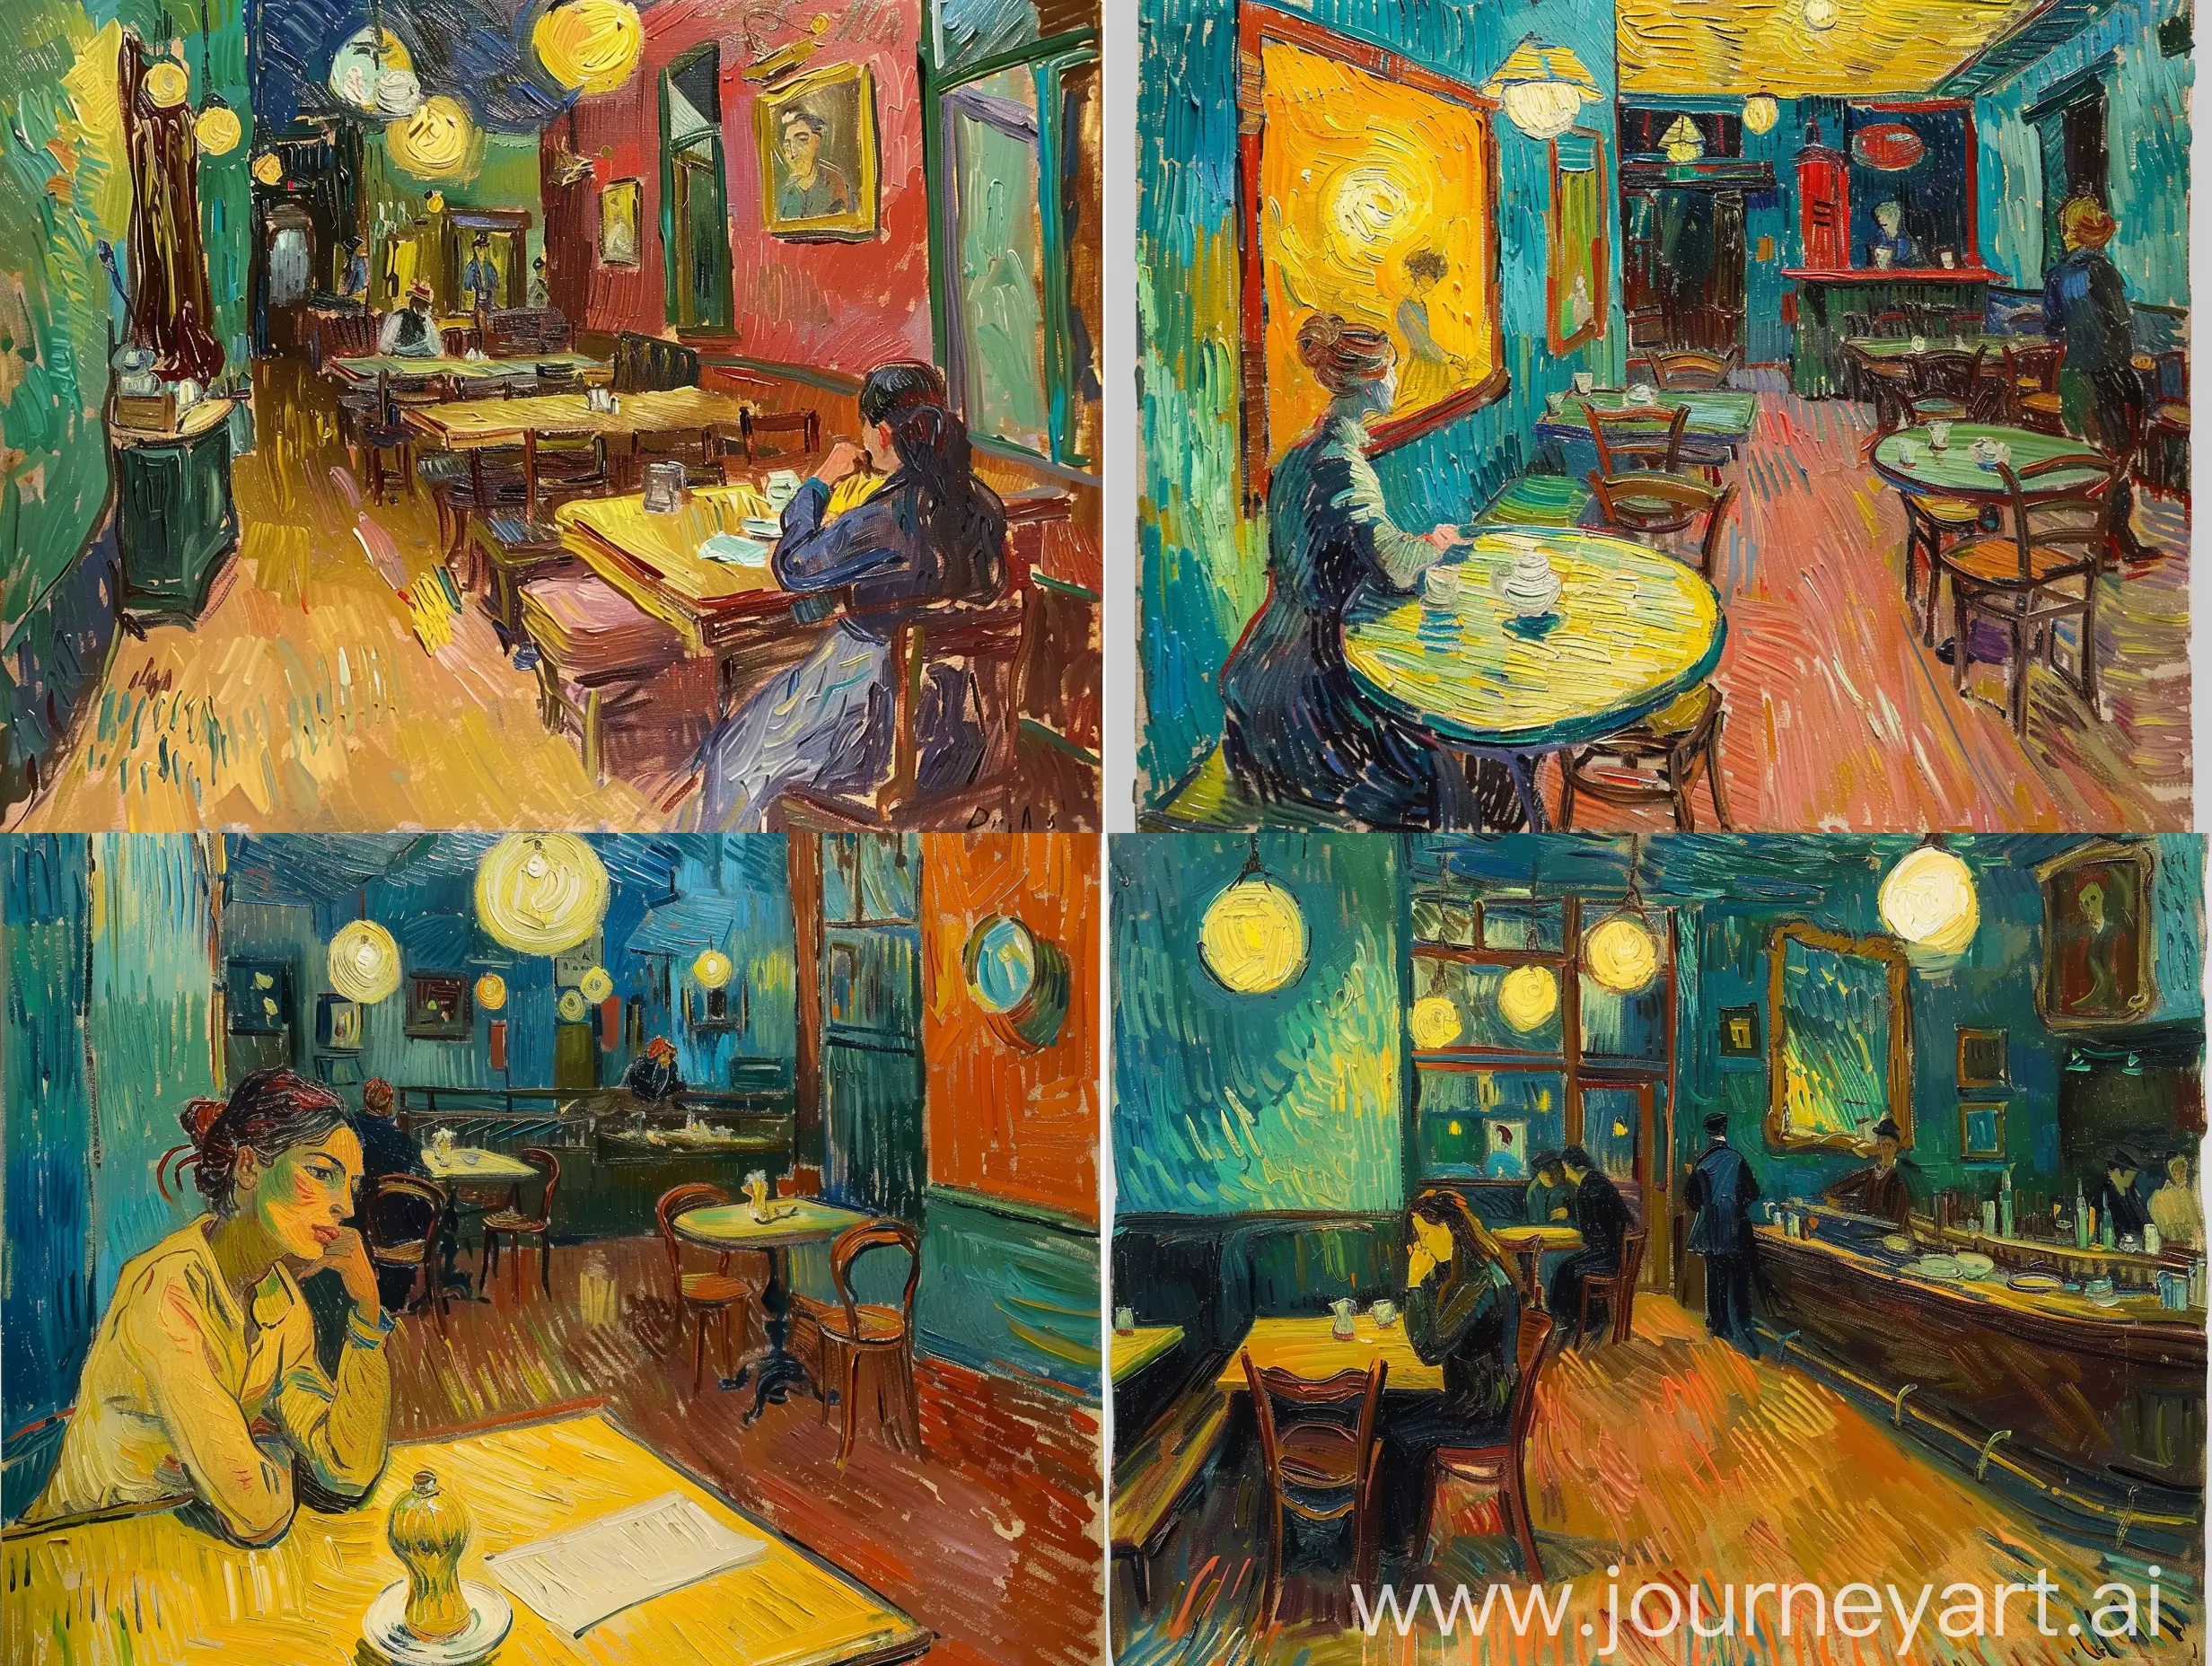 Woman-Alone-in-Restaurant-Interior-Van-Gogh-Style-Oil-Painting